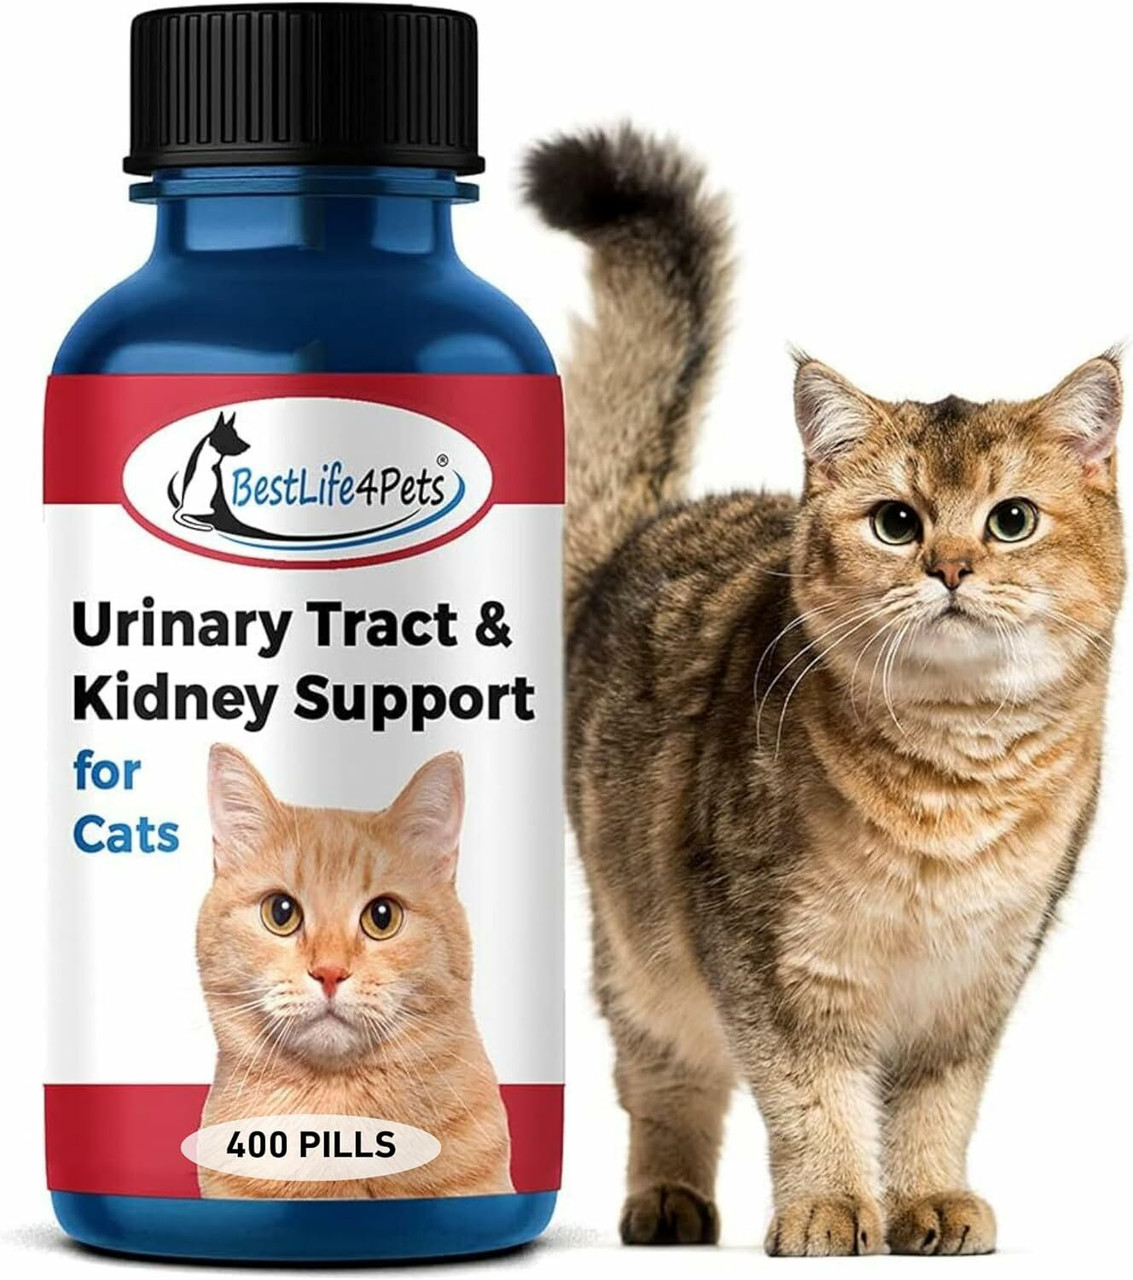 Urinary Tract & Bladder Support